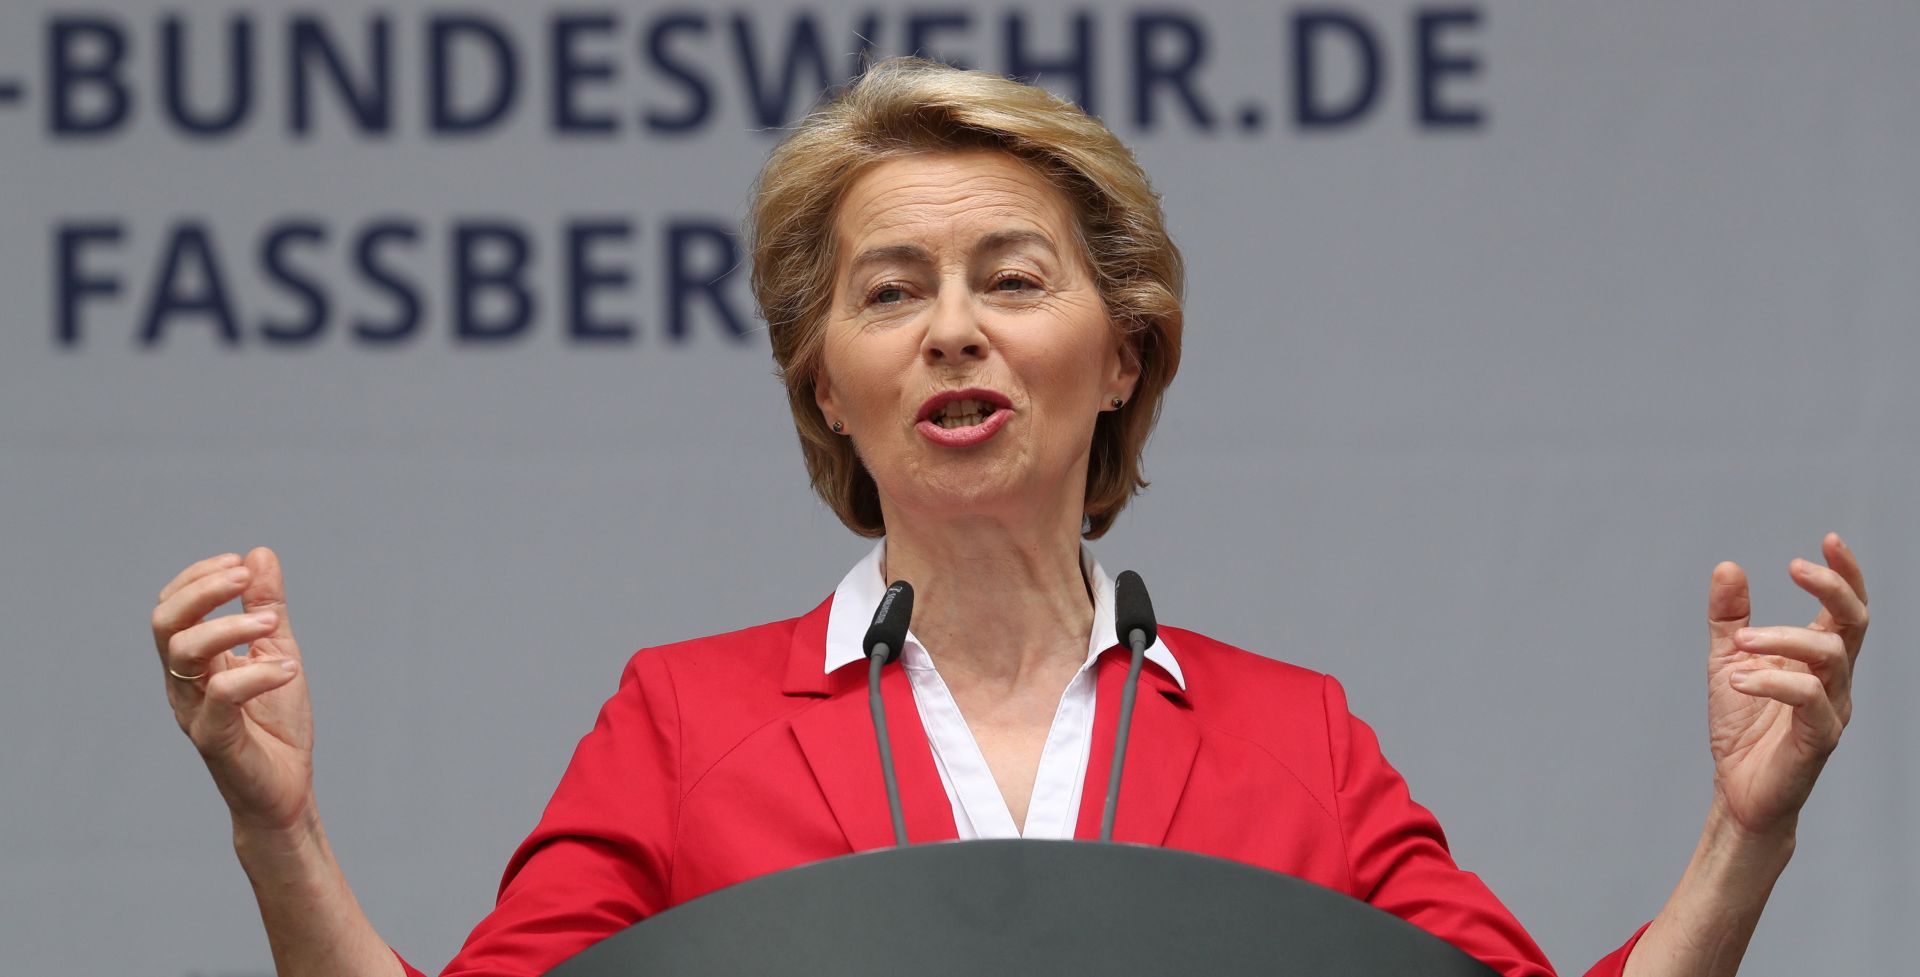 epa07690207 (FILE) - German Minister of Defense, Ursula von der Leyen speaks  during the Open Day of the German Armed Forces (Tag der Bundeswehr) at the airfield of Fassberg, northern Germany, 15 June 2019 (reissued 02 July 2019). Reports on 02 July 2019 state the European Council has agreed on the future leaders of the EU institutions and has nominated German defence minister Ursula von der Leyen as European Commission president.  EPA/FOCKE STRANGMANN